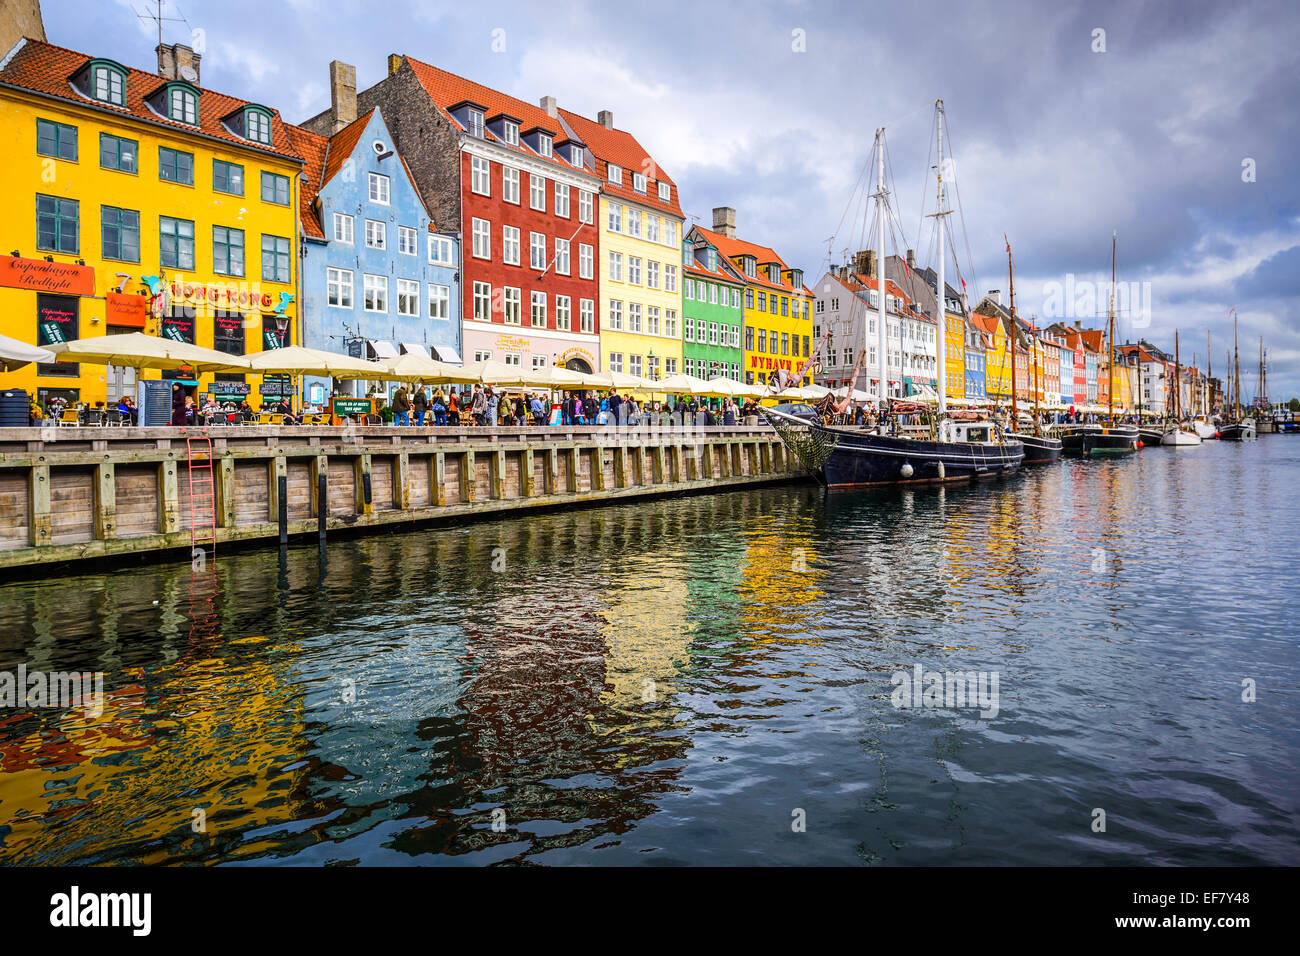 Waterfront of Nyhavn canal. The bar-lined waterfront dates from the 17th century. Stock Photo